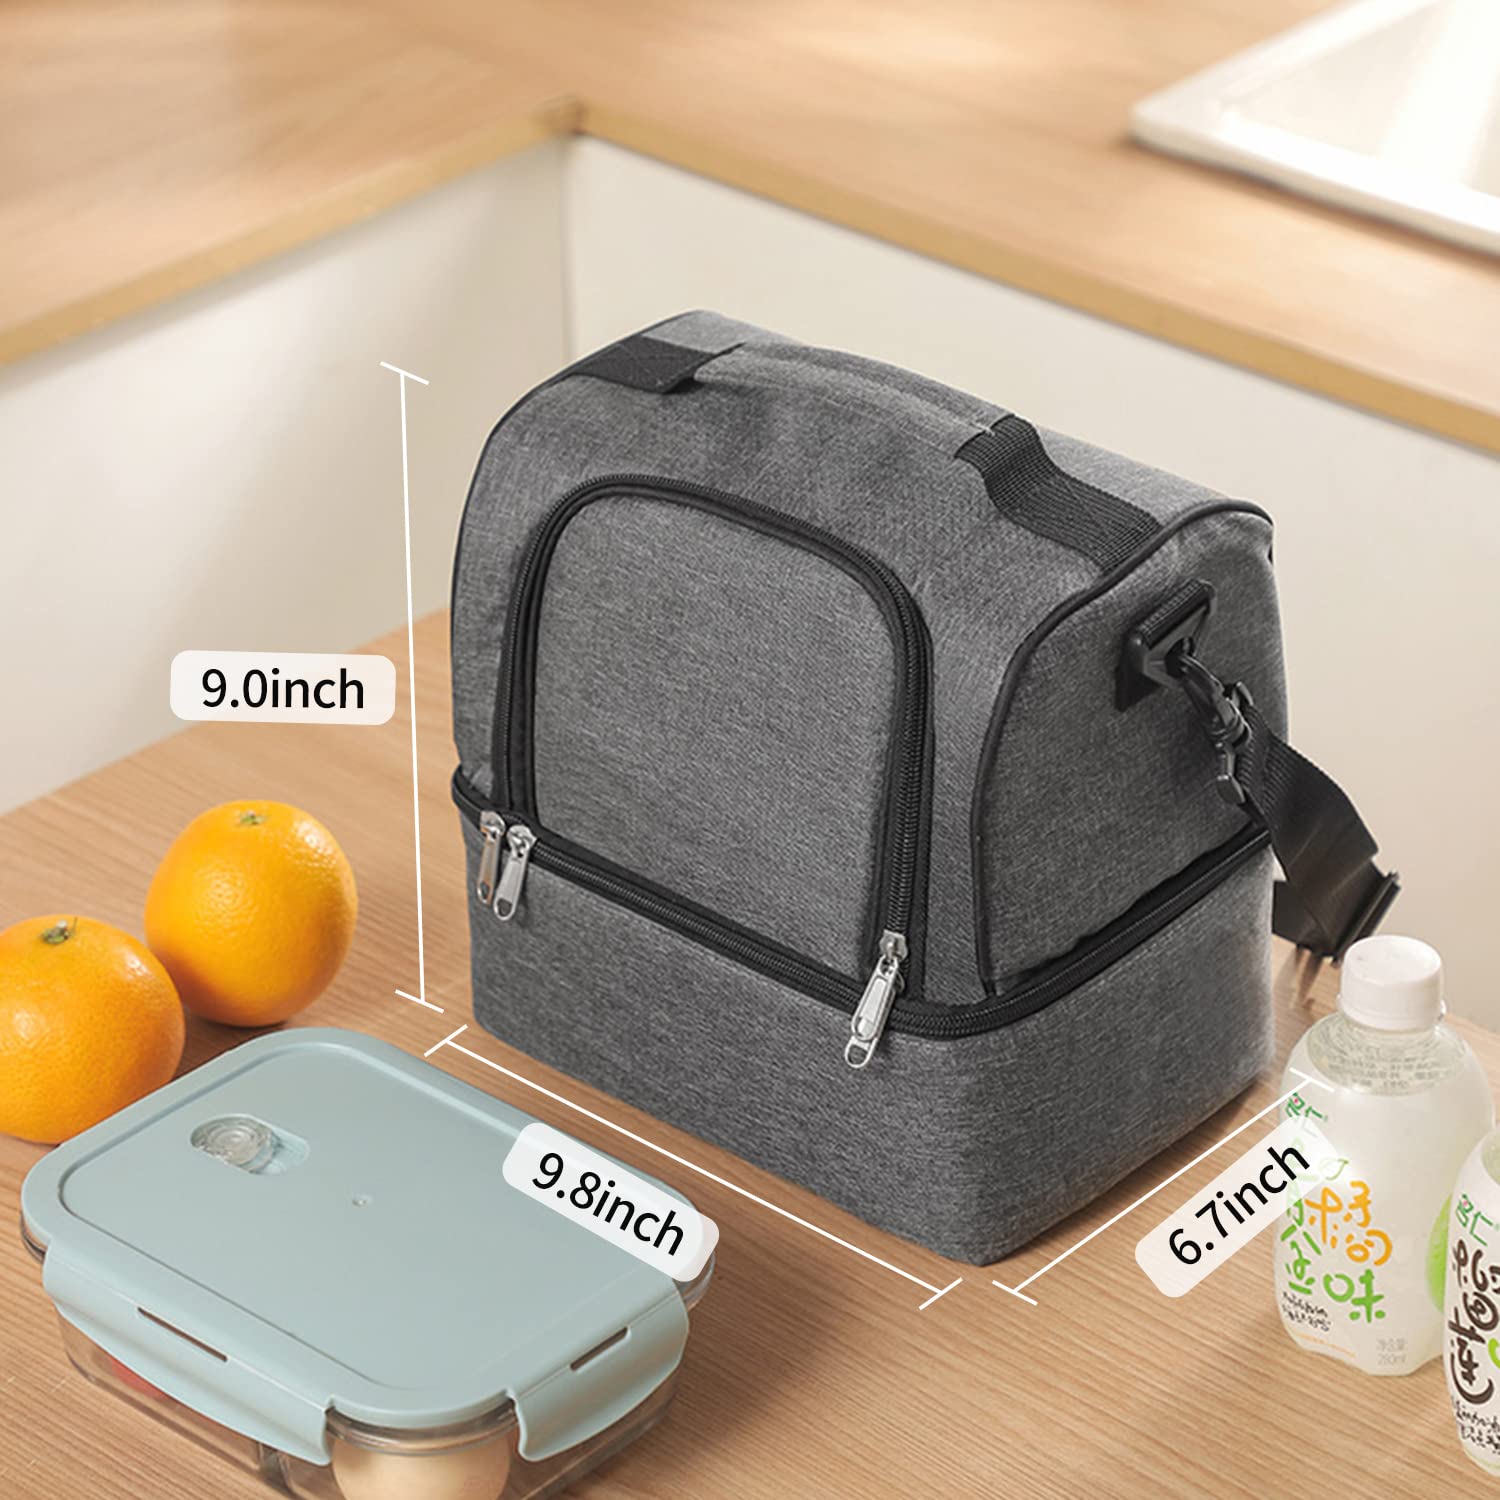 HANKLPH Double Layer Lunch Box for Women/Men, Insulated Lunch Bag Large Adults, Reusable Lunchbox Cooler Bag，Suitable for Work Picnic Hiking Beach (Grey)